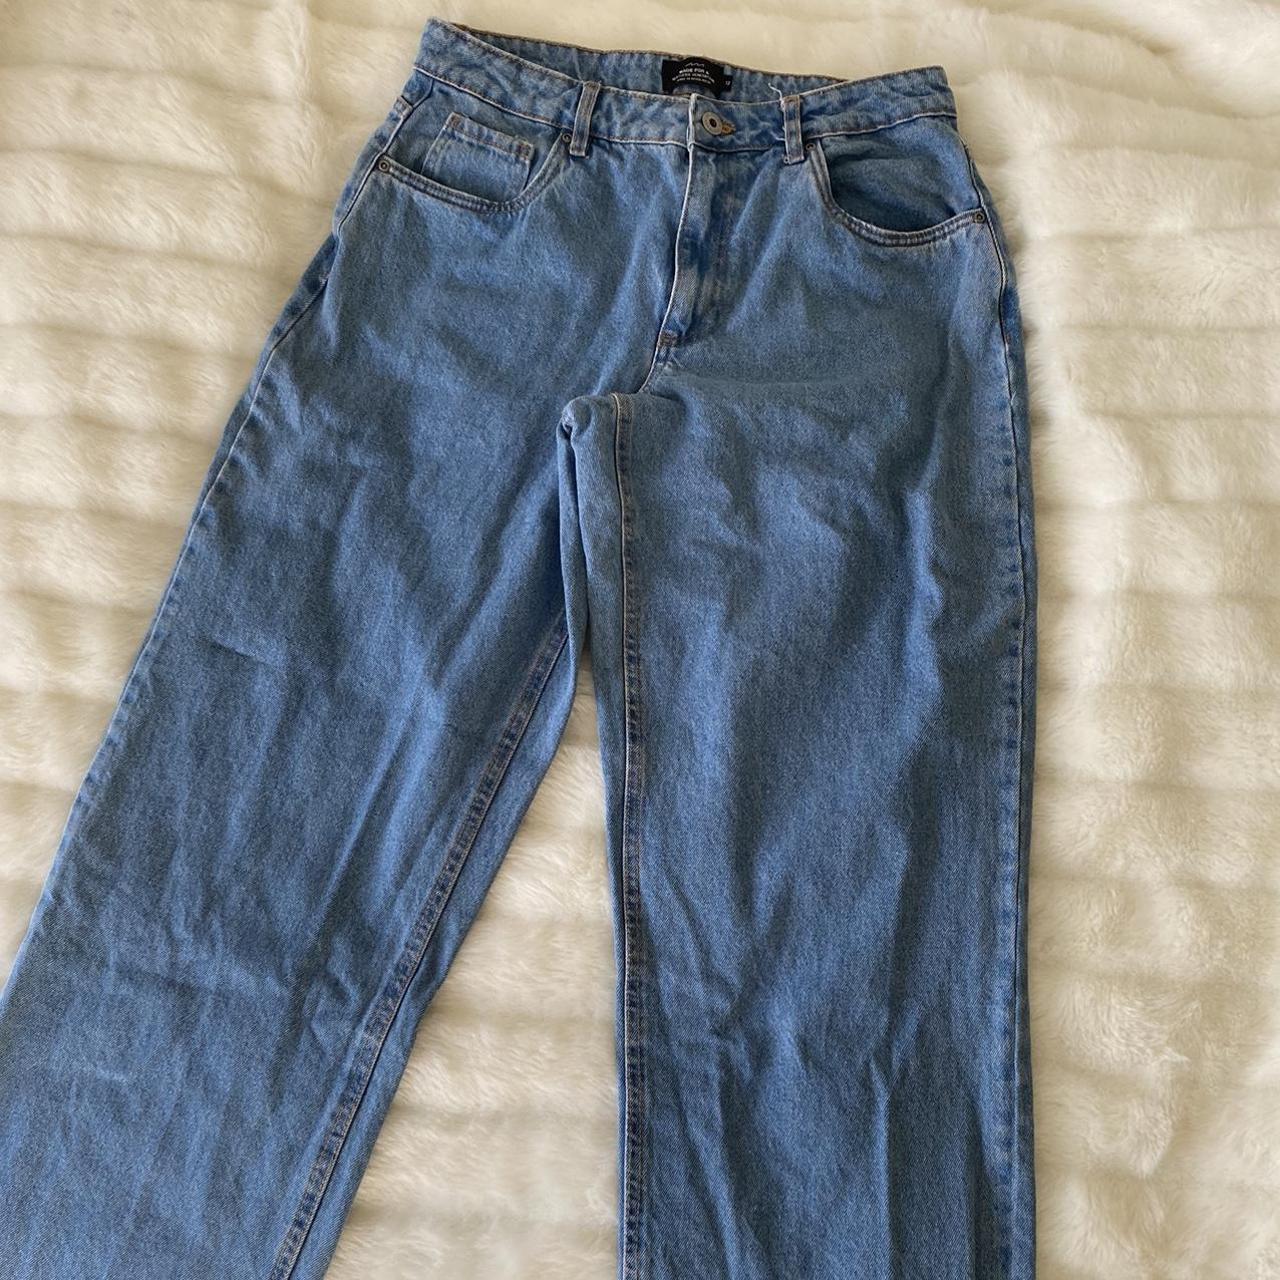 Low rise baggy skater jeans 👁‍🗨 fits well on sizes... - Depop